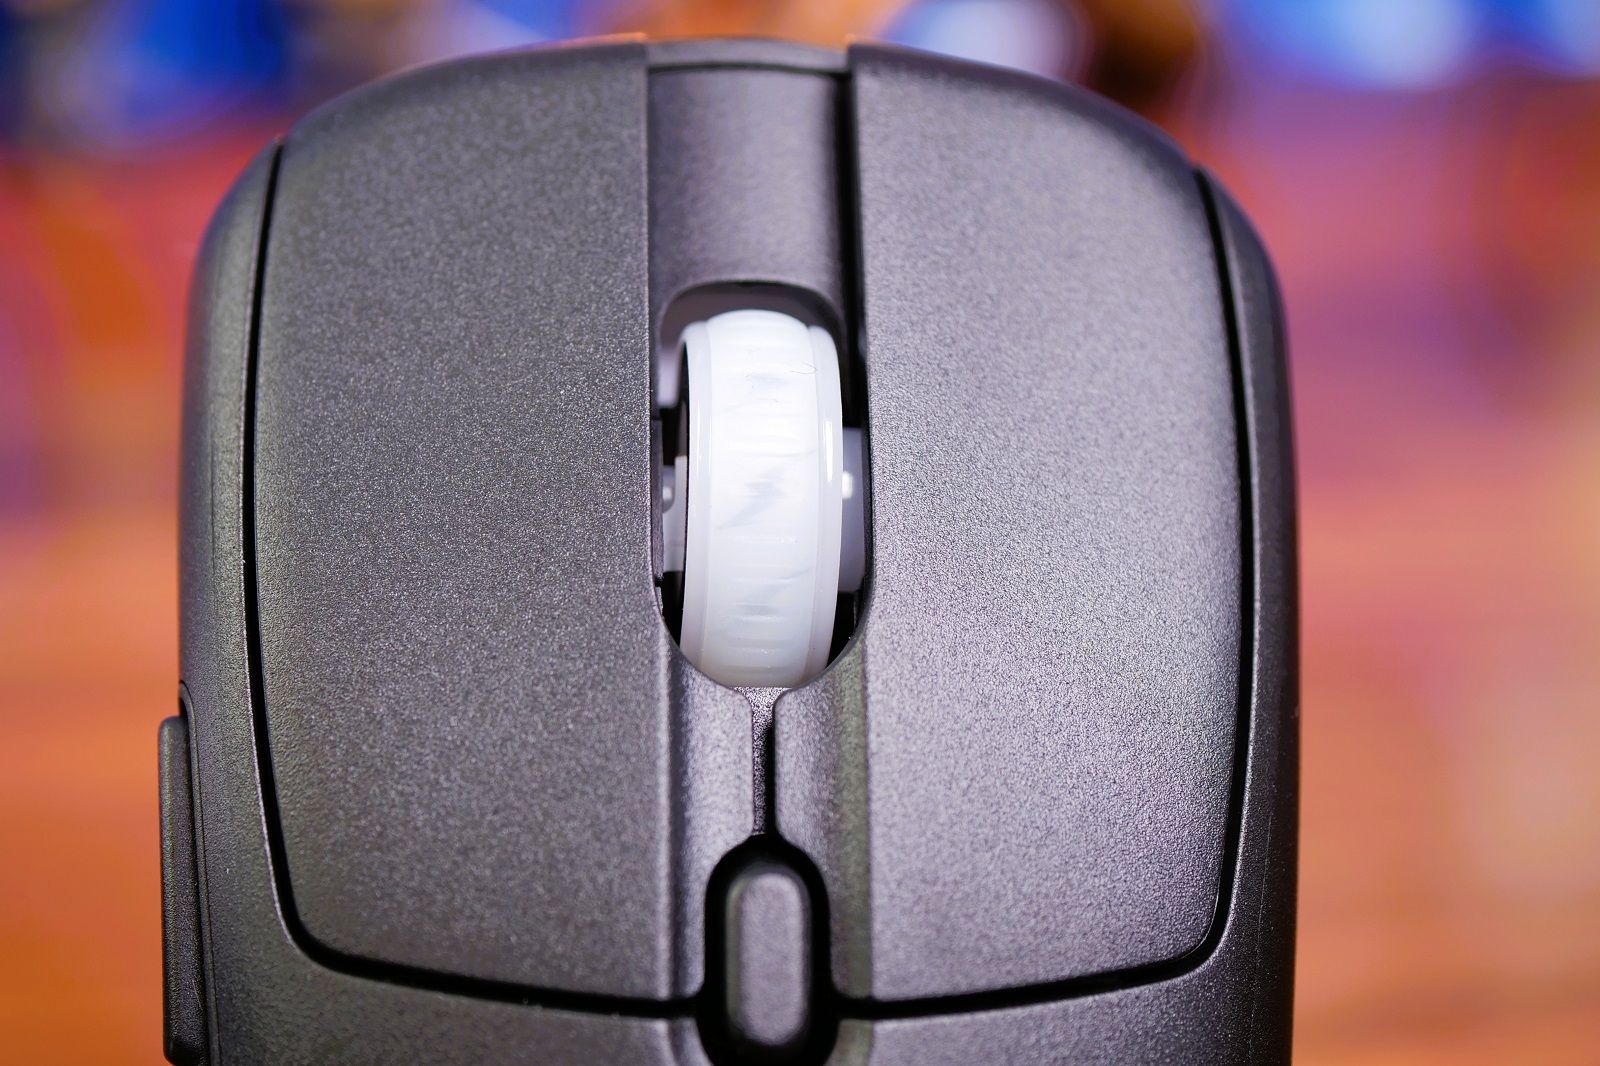 Fnatic Bolt gaming mouse review photo 12